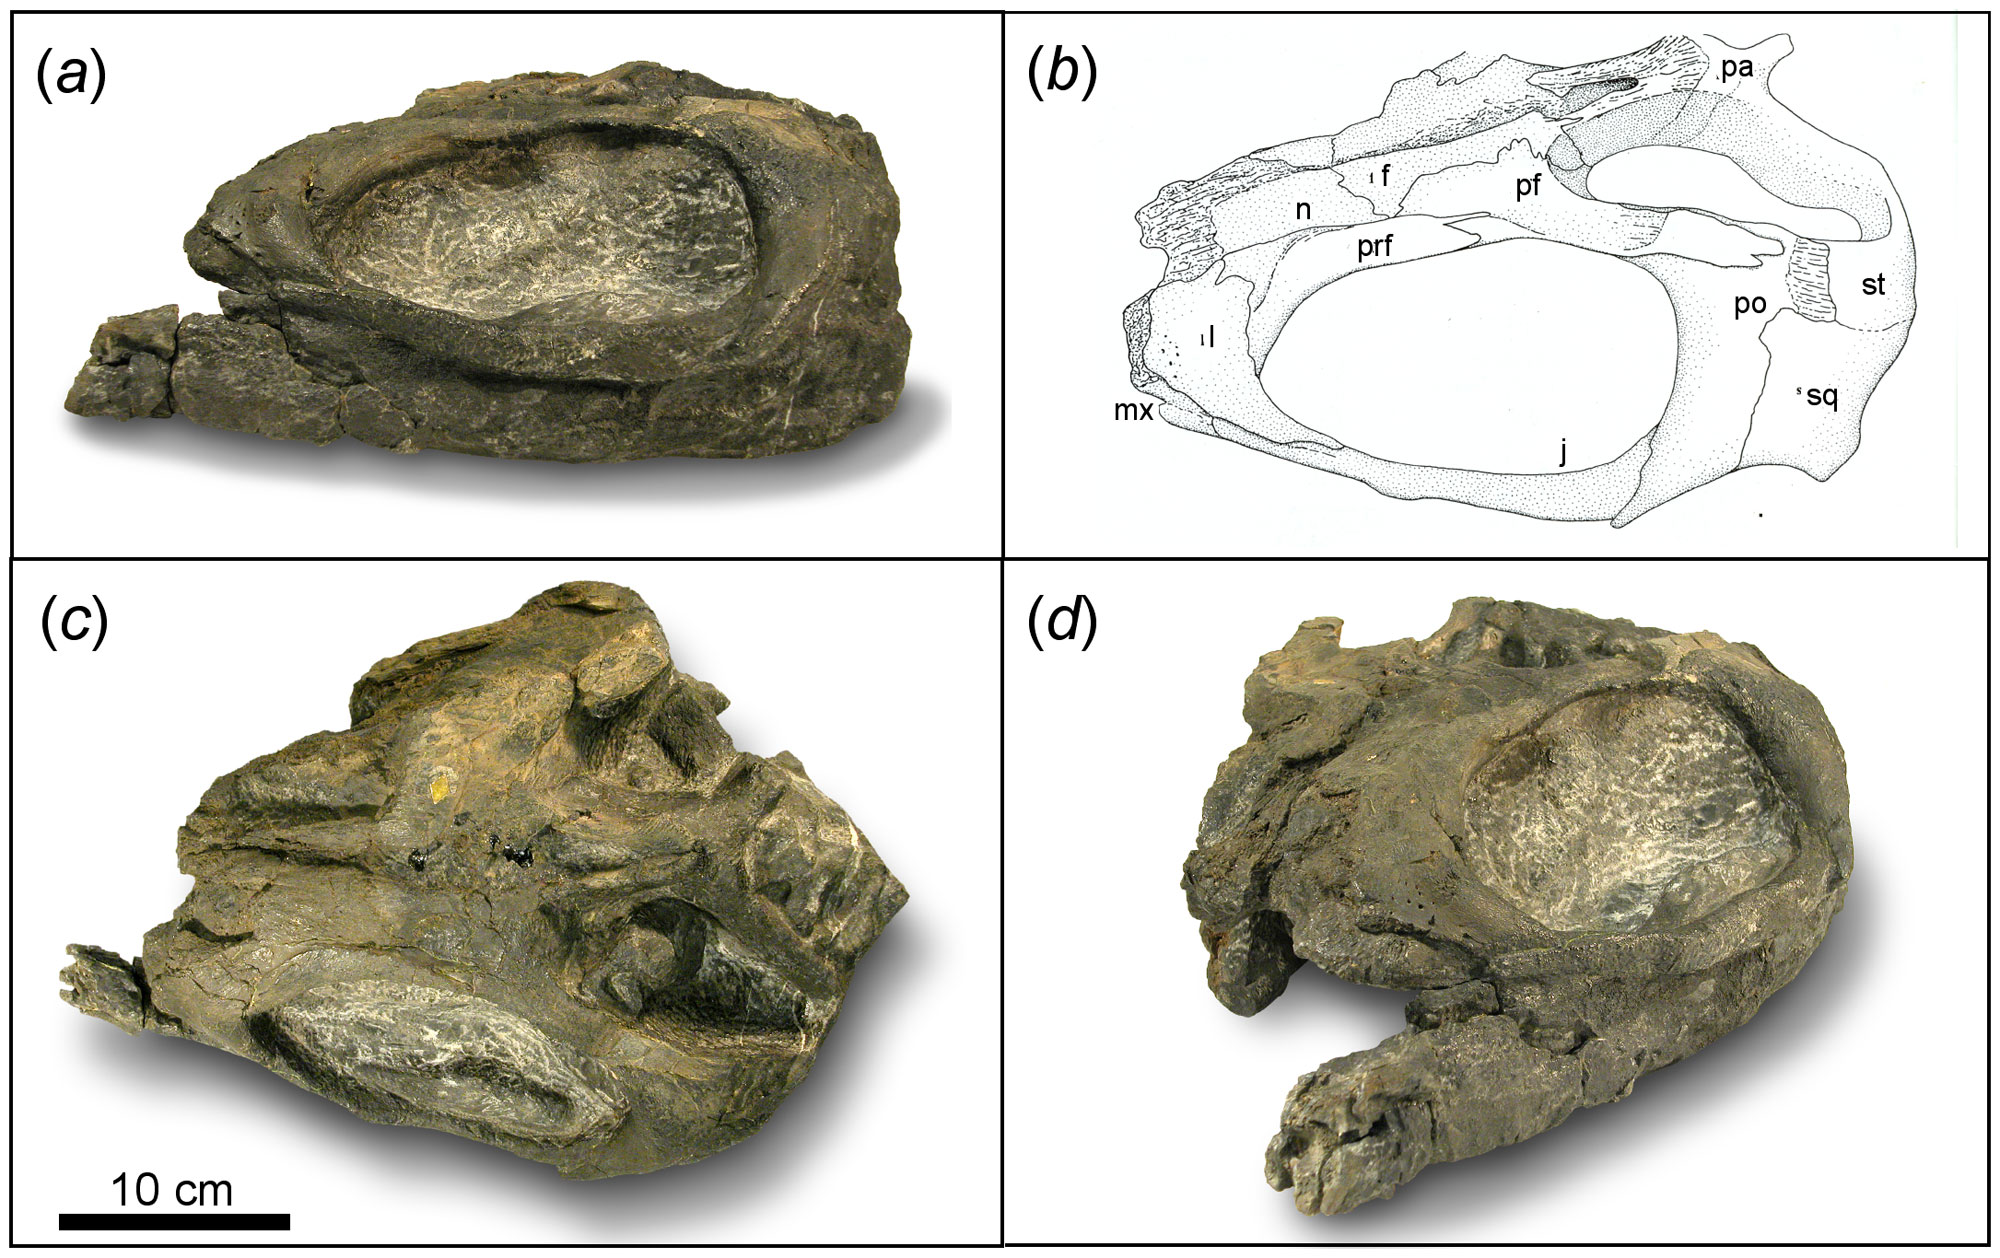 4-panel image showing 3 photographs and a drawing of the skull of the ichthysaur Shastasaurus pacificus. The skull has a large eye socket; most of the snout is missing. It is thought that this animal may have had no teeth and a very short snout. 